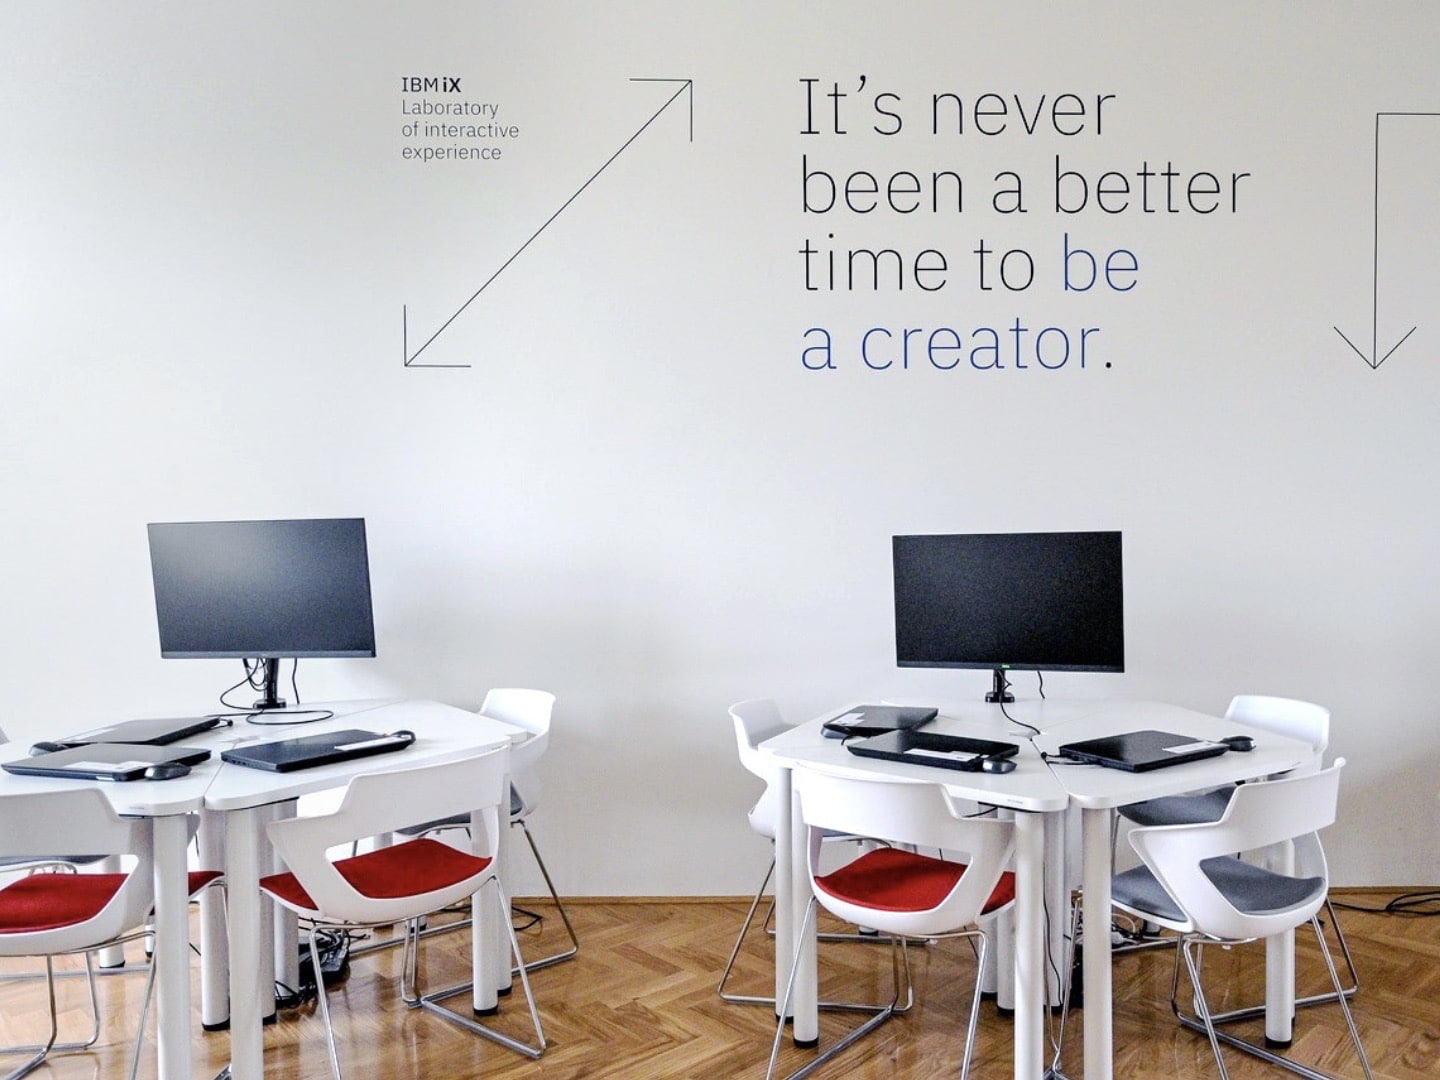 Two chairs with desks, office view and a quote: 